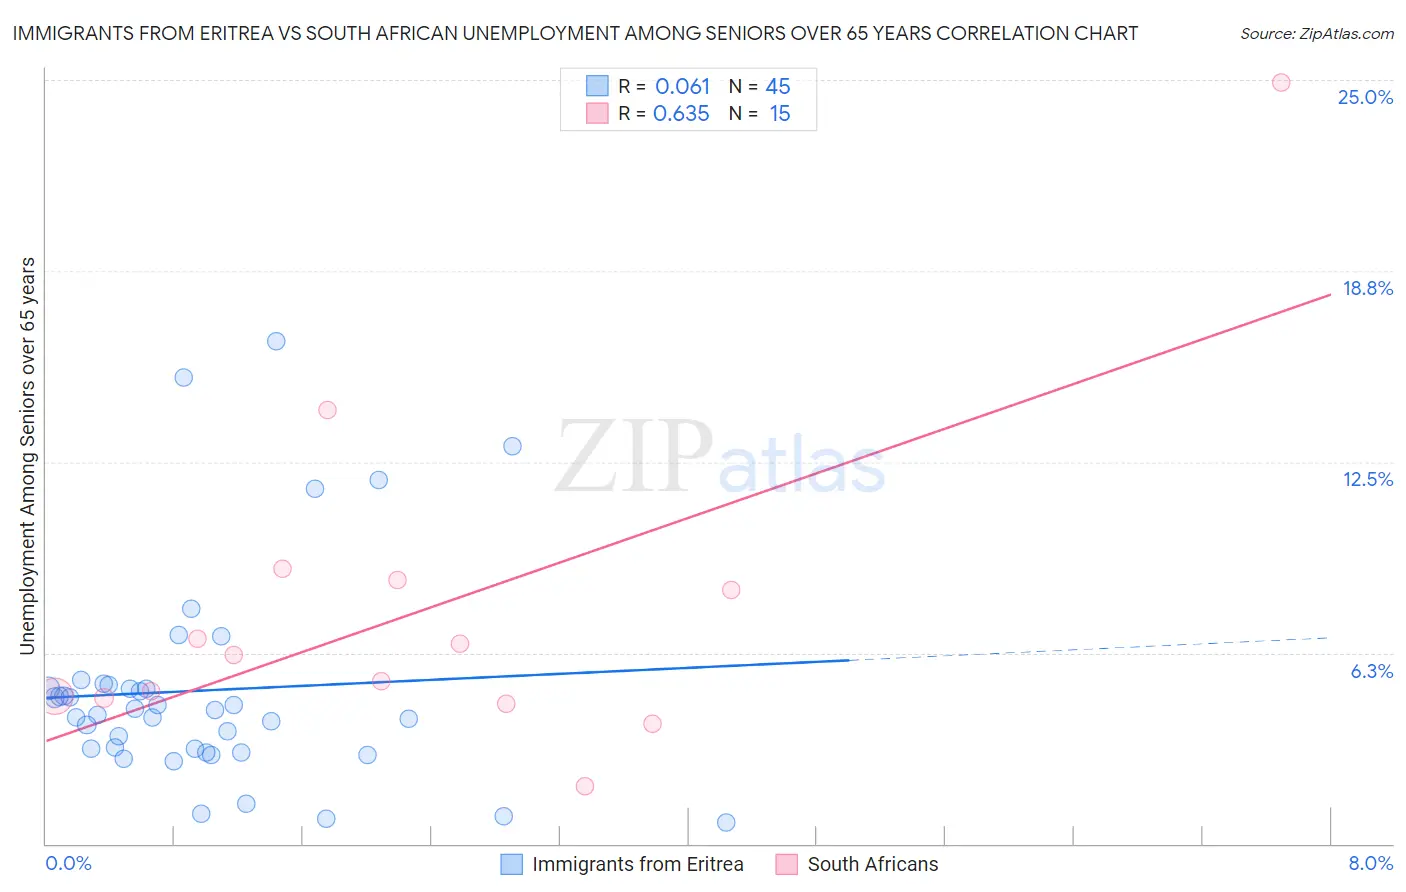 Immigrants from Eritrea vs South African Unemployment Among Seniors over 65 years